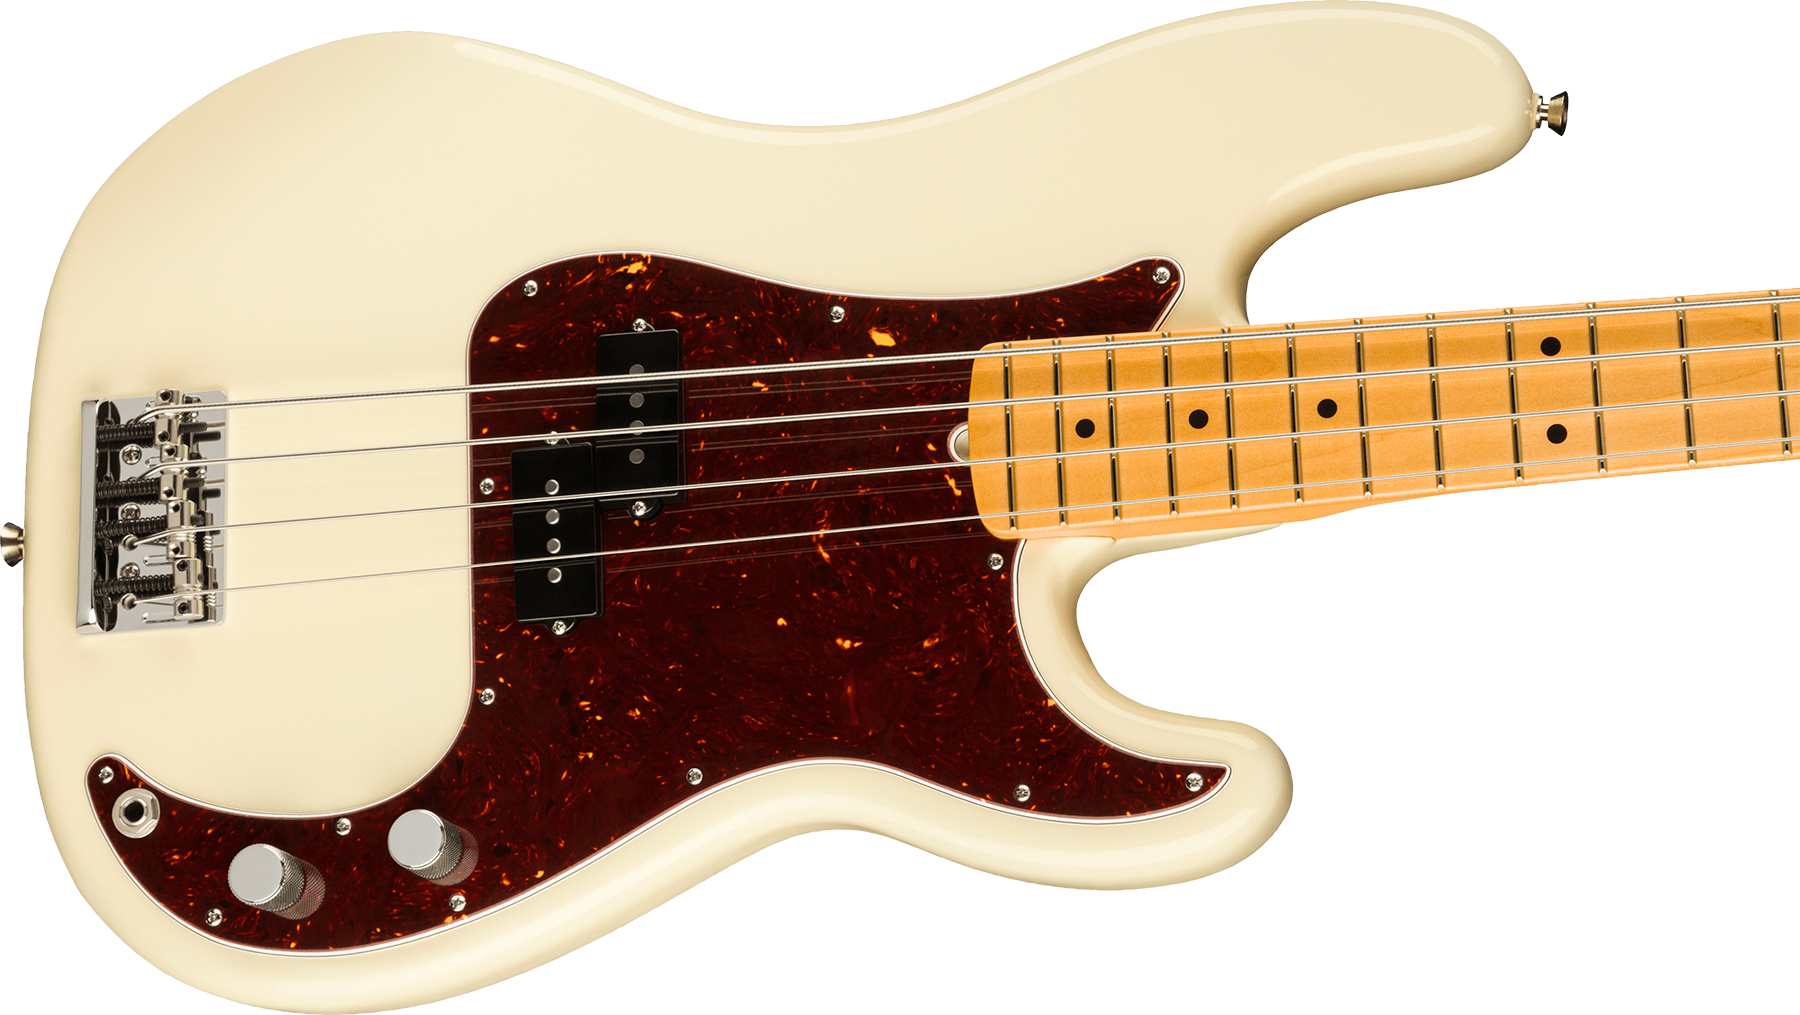 Fender Precision Bass American Professional Ii Usa Mn - Olympic White - Solidbody E-bass - Variation 2